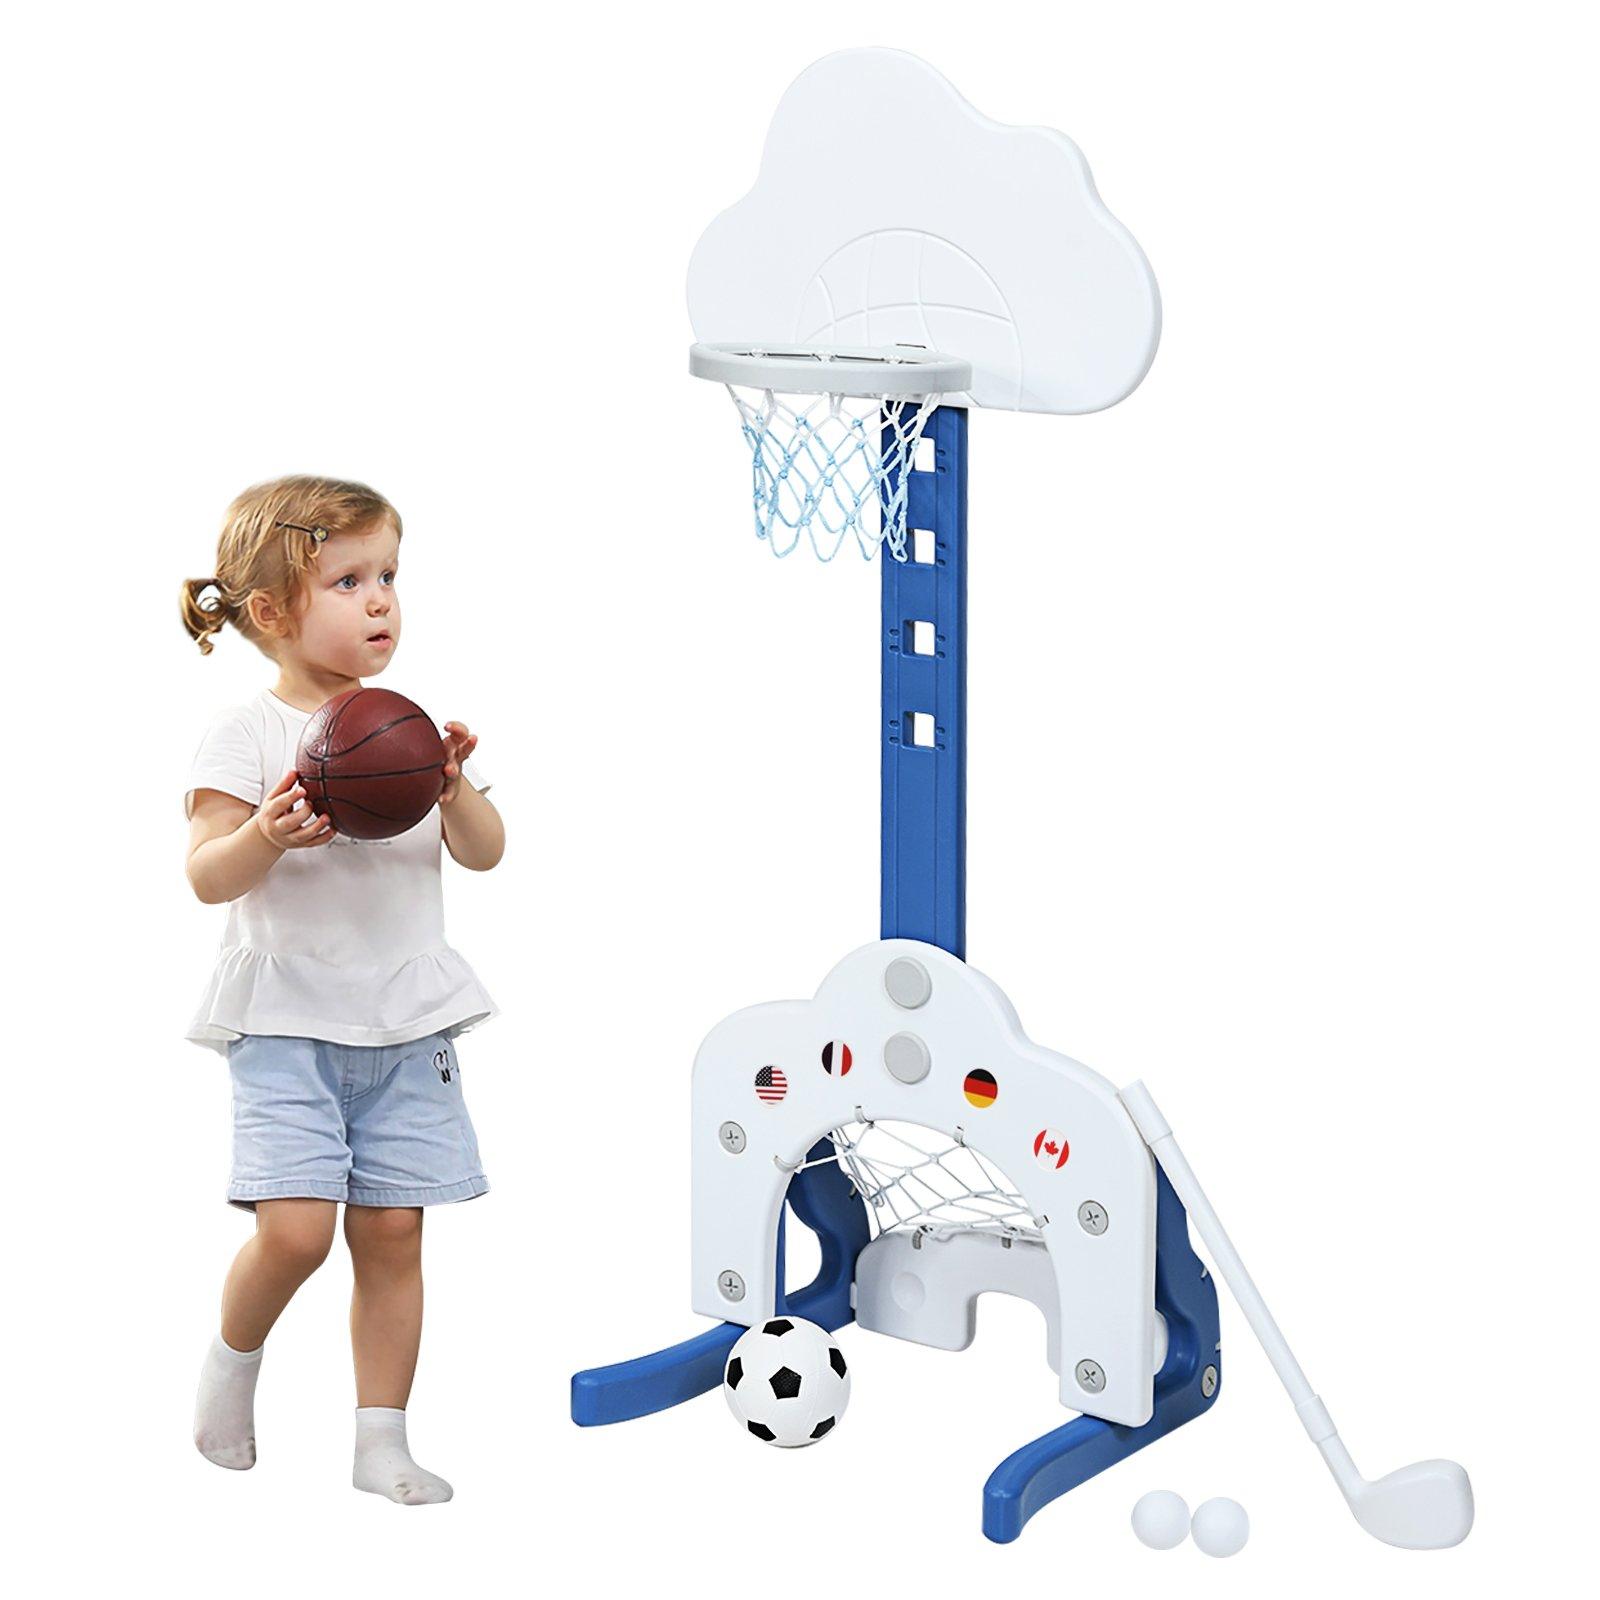 Basketball Hoop Set 3 in 1 Sports Activity Center with Basketball Football & Golf